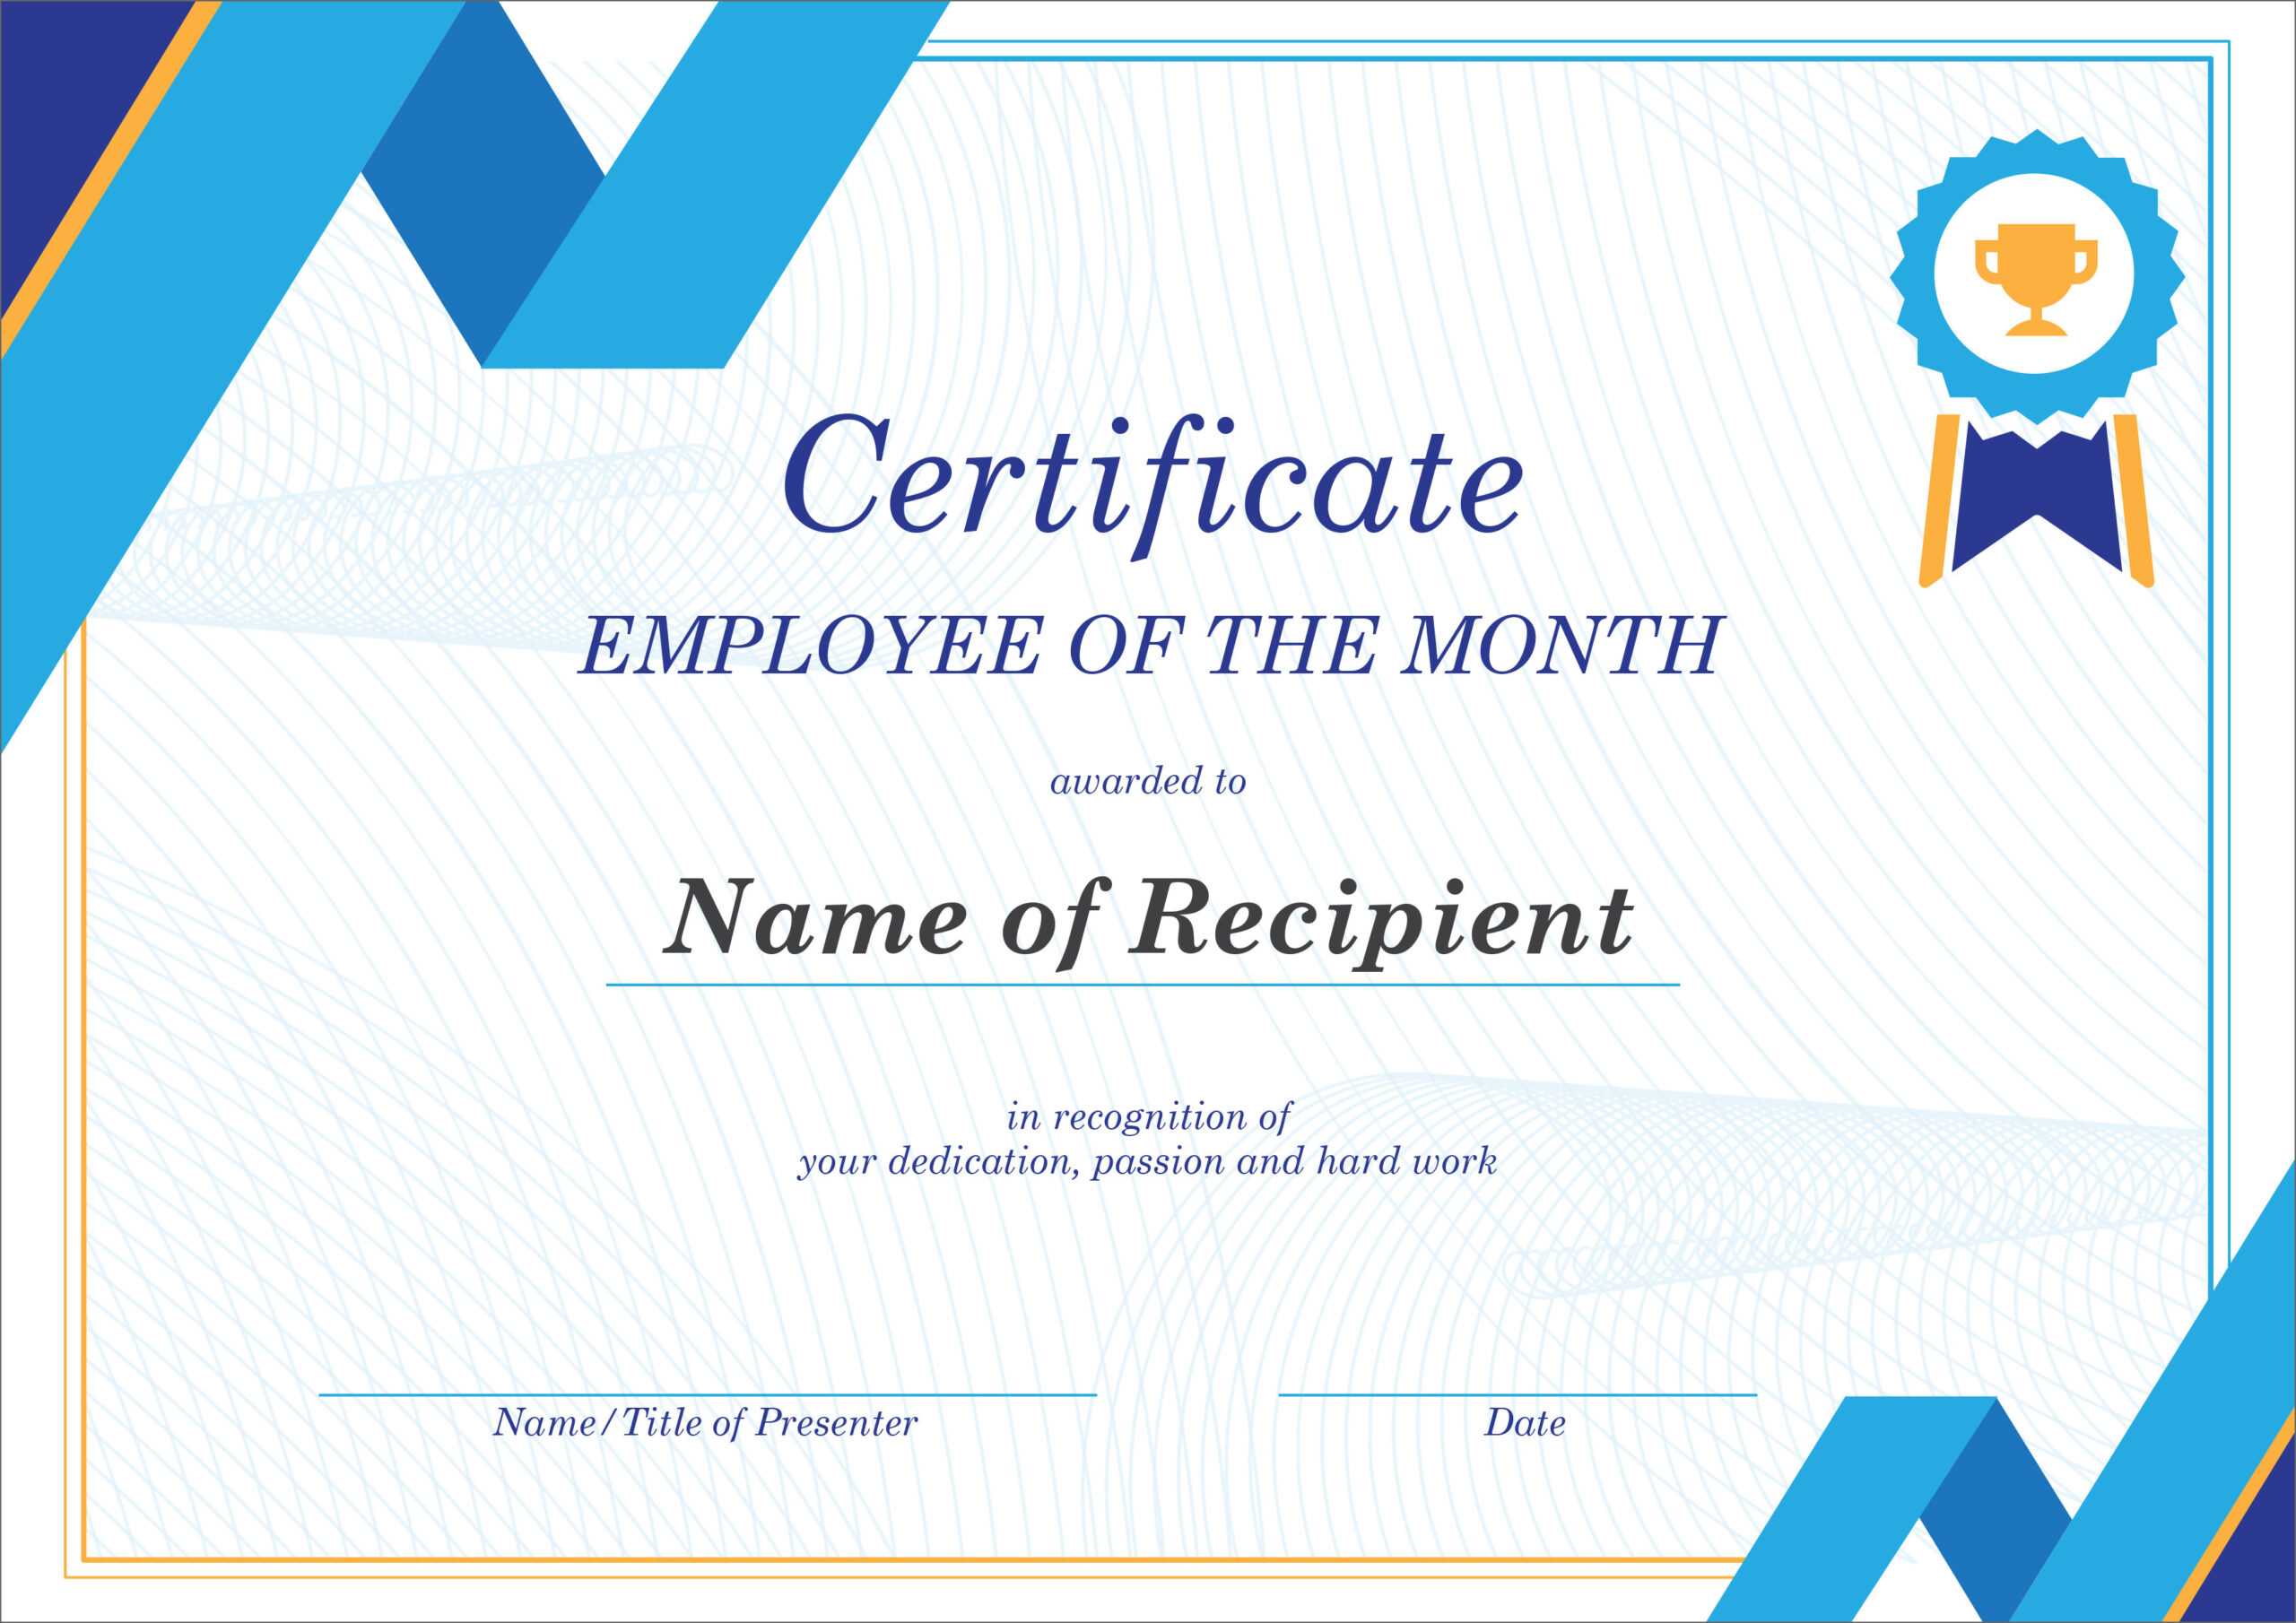 50 Free Creative Blank Certificate Templates In Psd Intended For Employee Recognition Certificates Templates Free